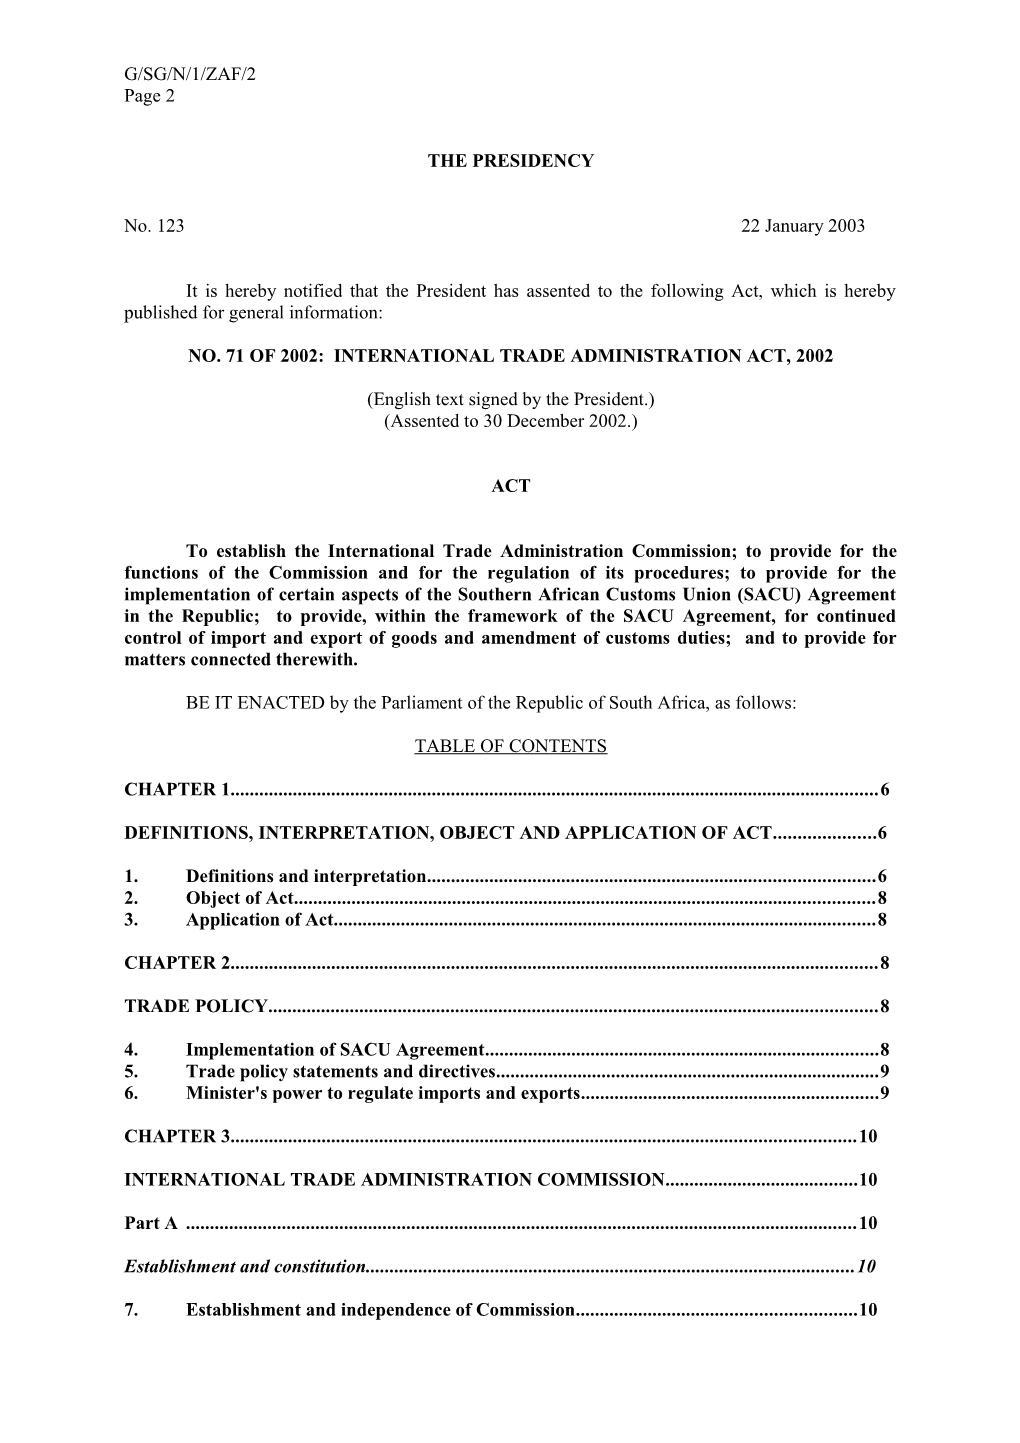 Notifications of Laws, Regulations and Administrative